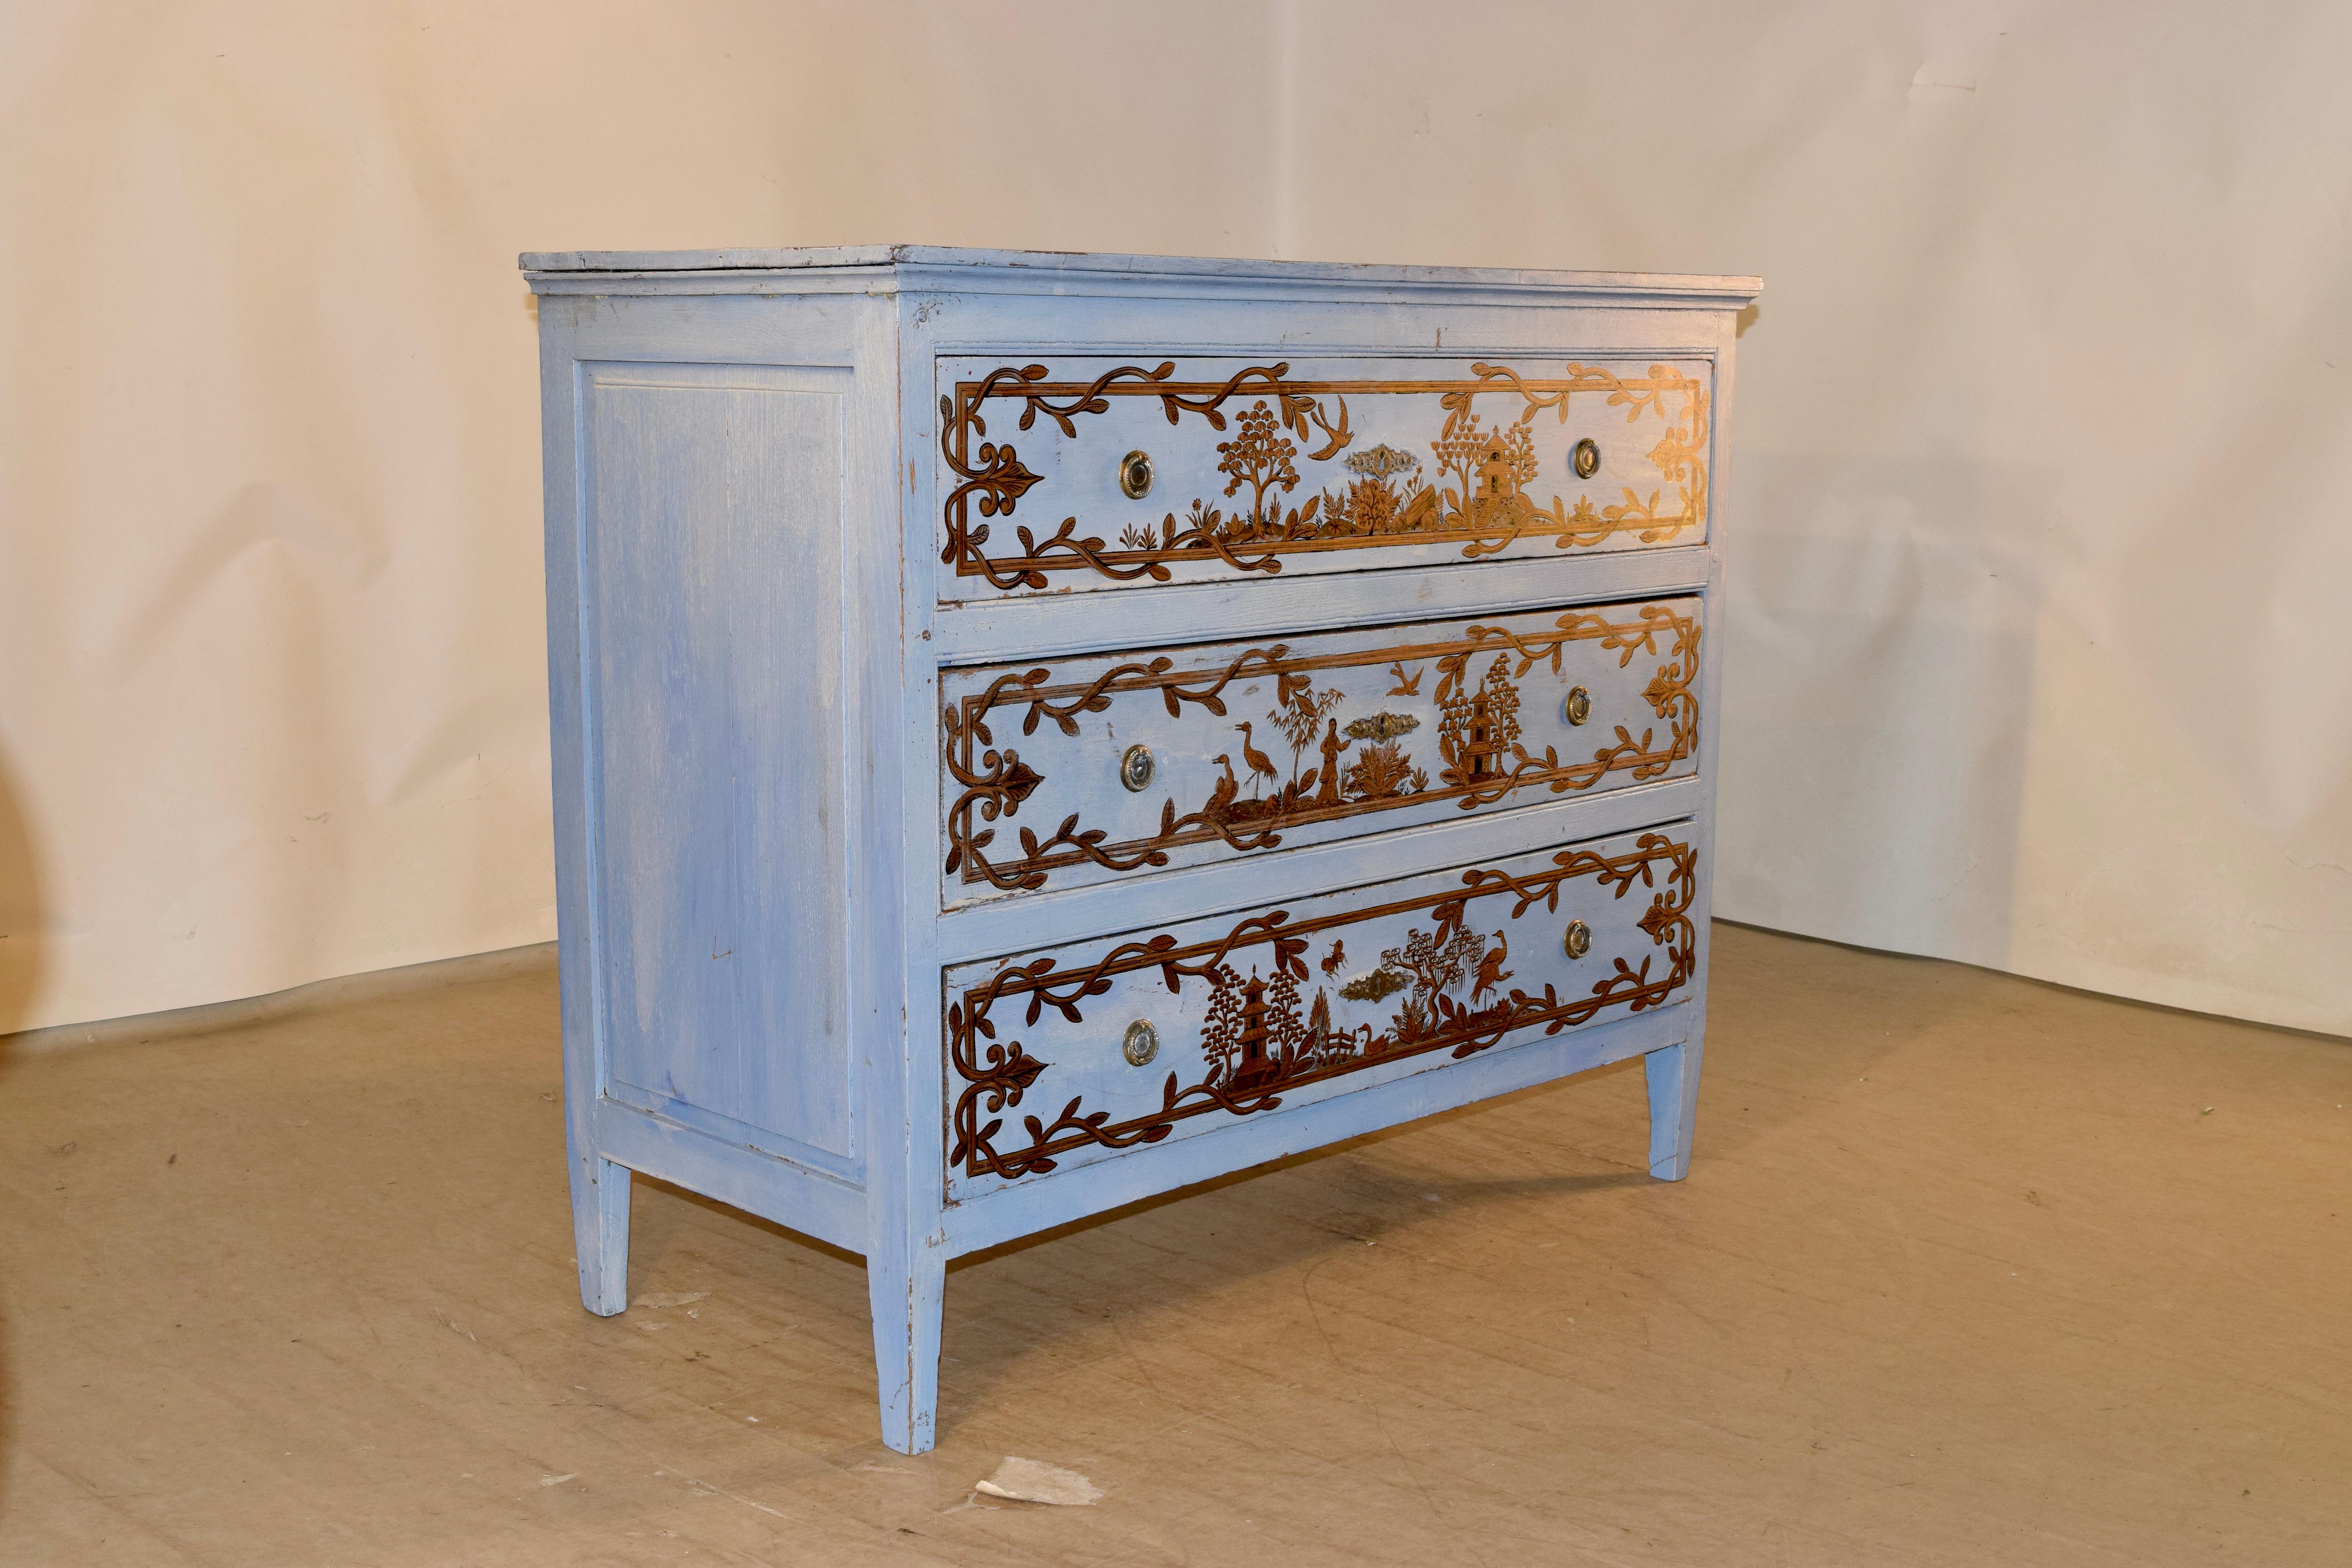 18th century French oak chest from the Directoire period. The chest has been painted later with wonderful chinoiserie decoration.